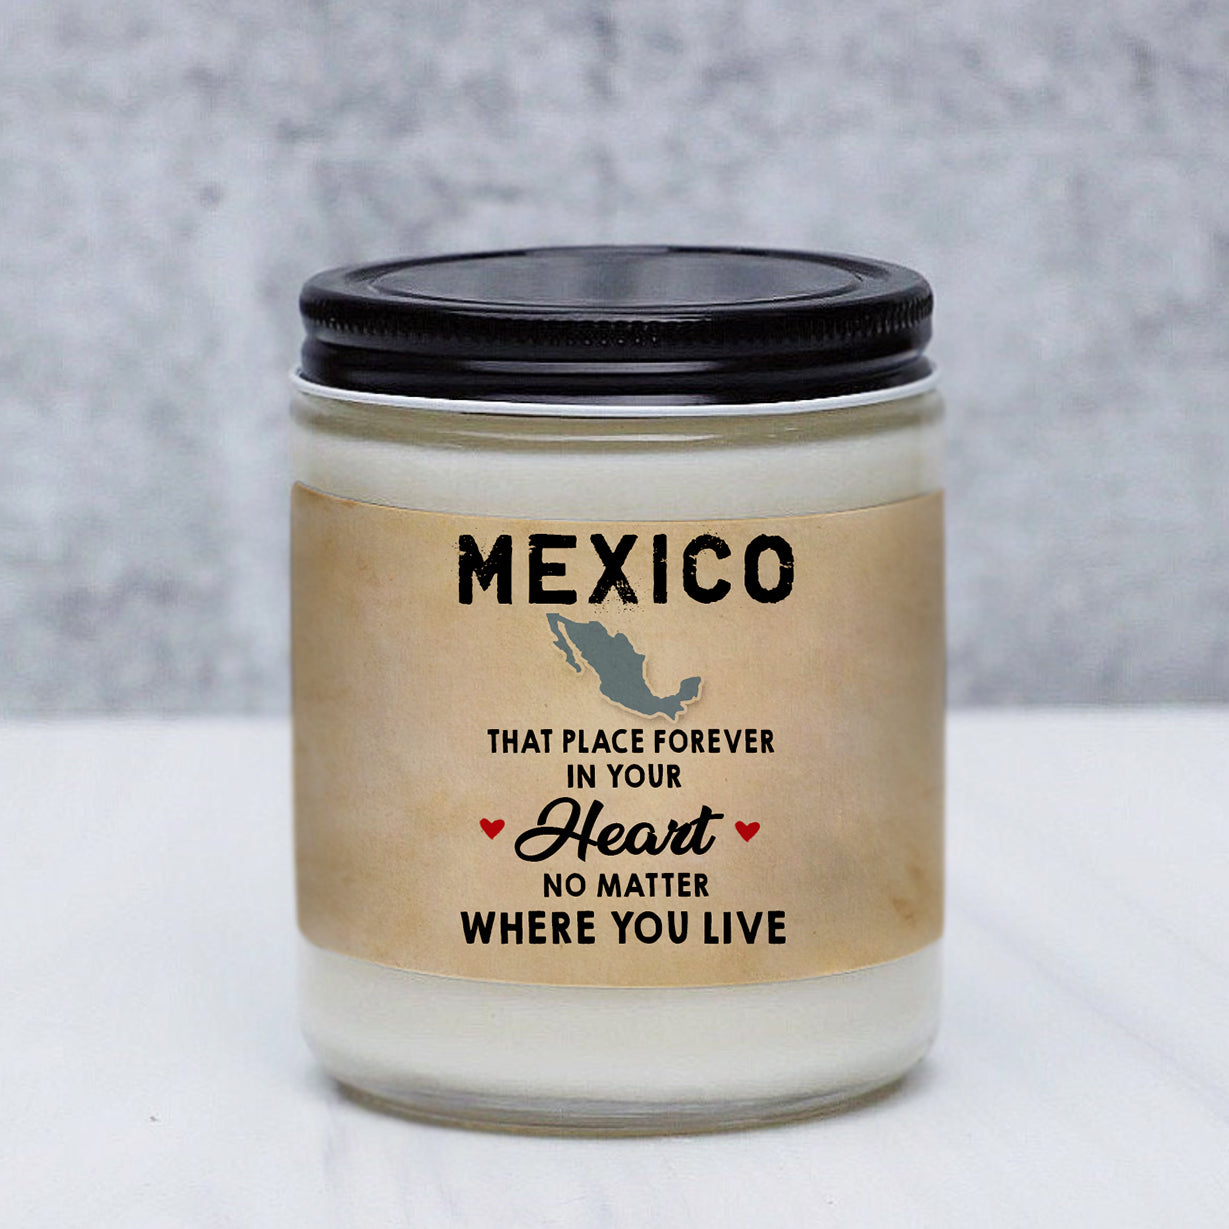 Mexico Candle That Place Forever In Your Heart No Matter Where You Live - Candle Born Teezalo